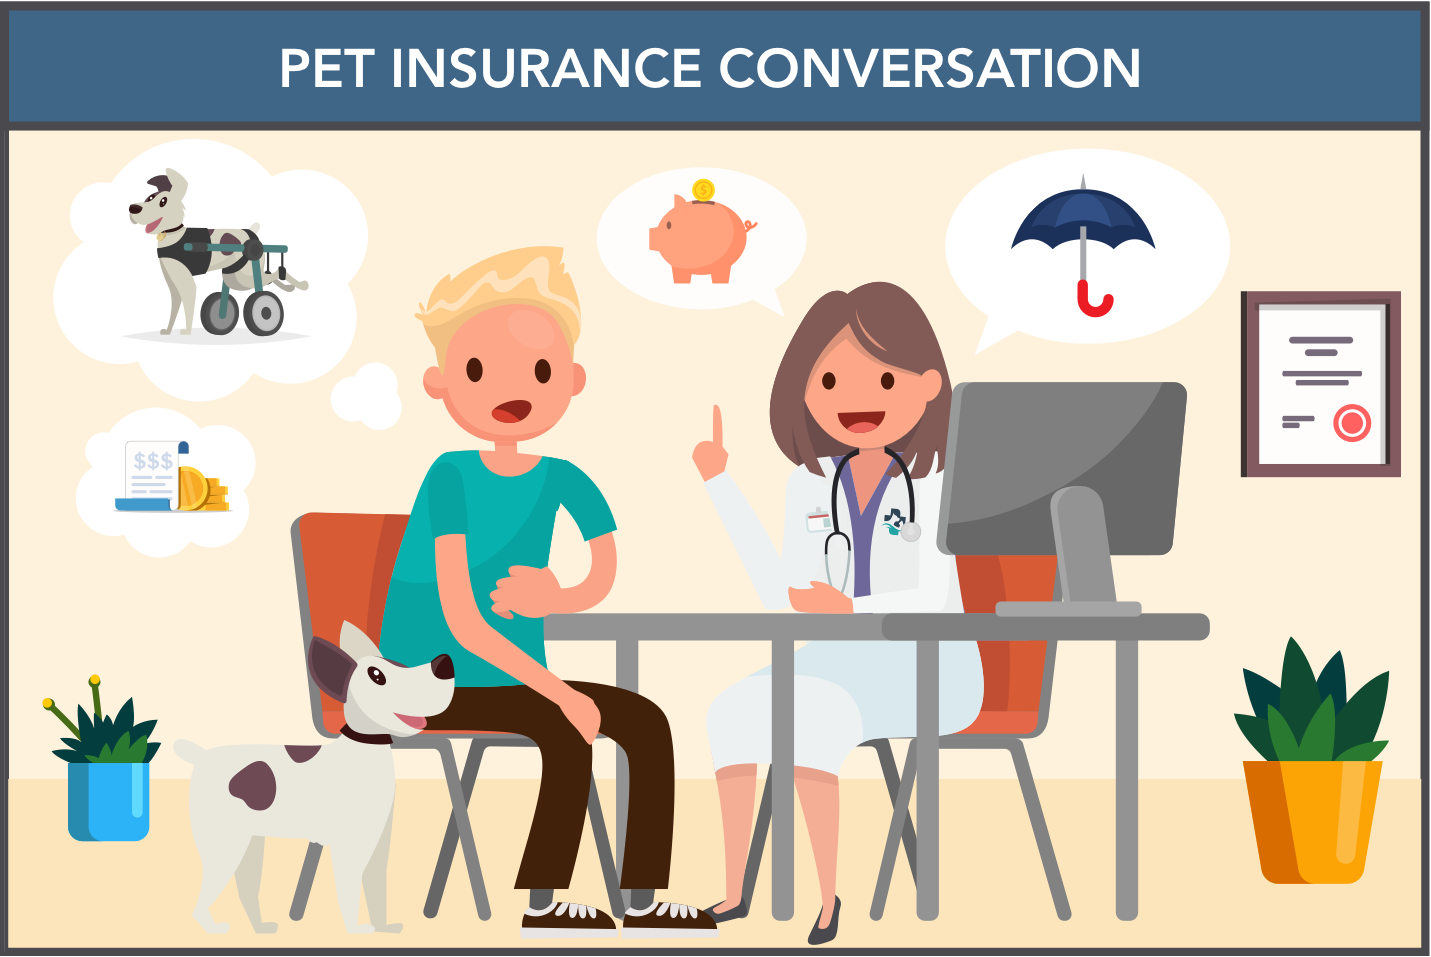 A veterinarian talk with a pet parent about pet insurance and why it's important to purchase.